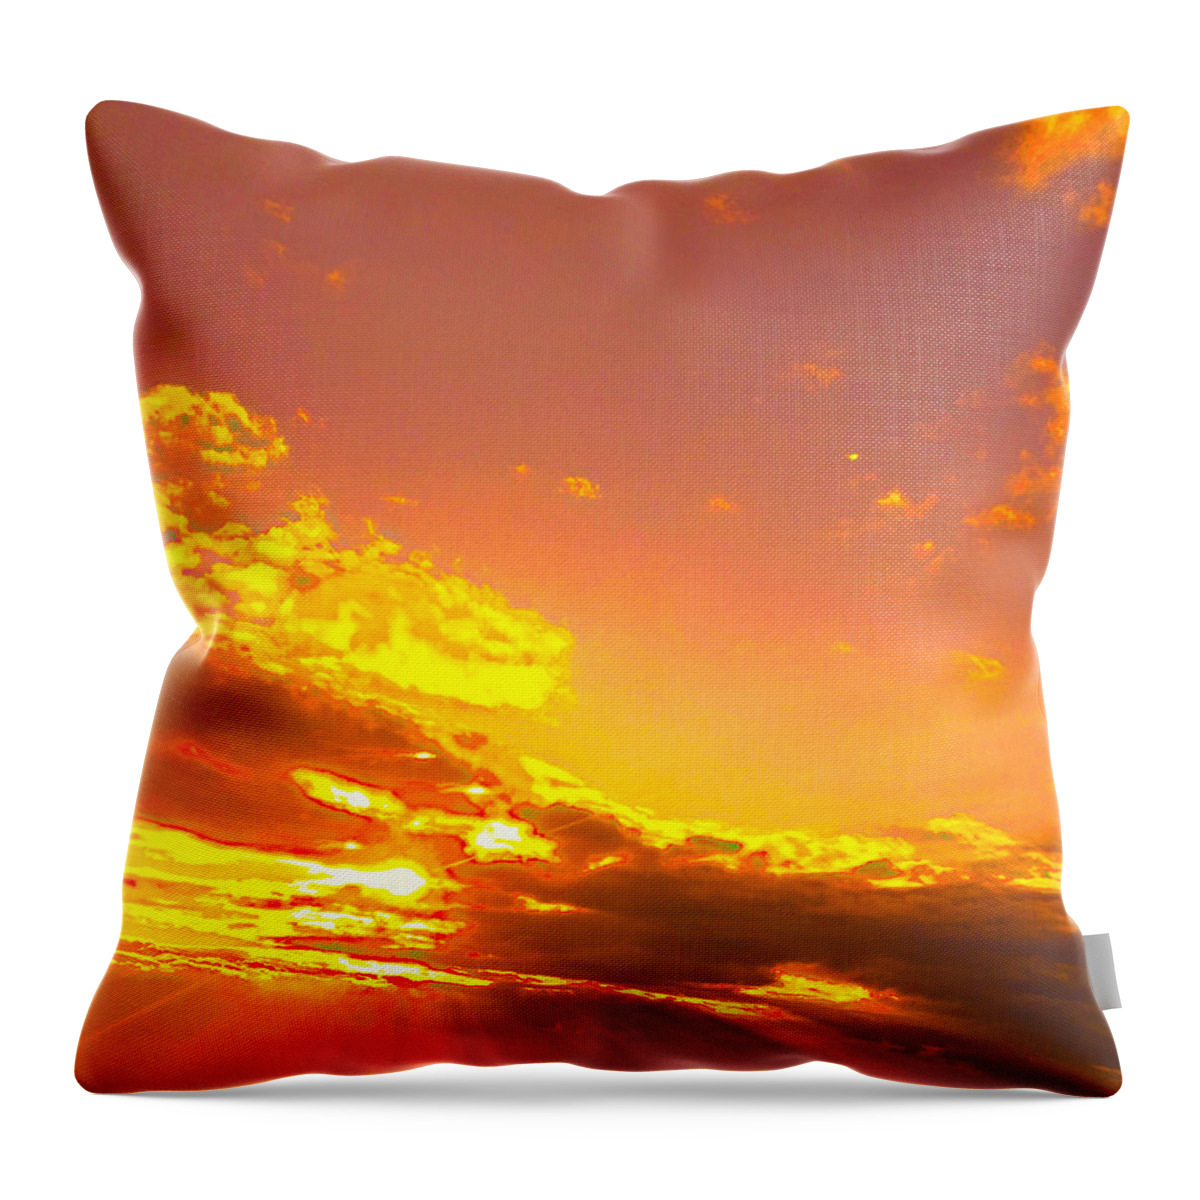 Flowijng Lave In The Sky Throw Pillow featuring the photograph River Of Gold by Trevor A Smith